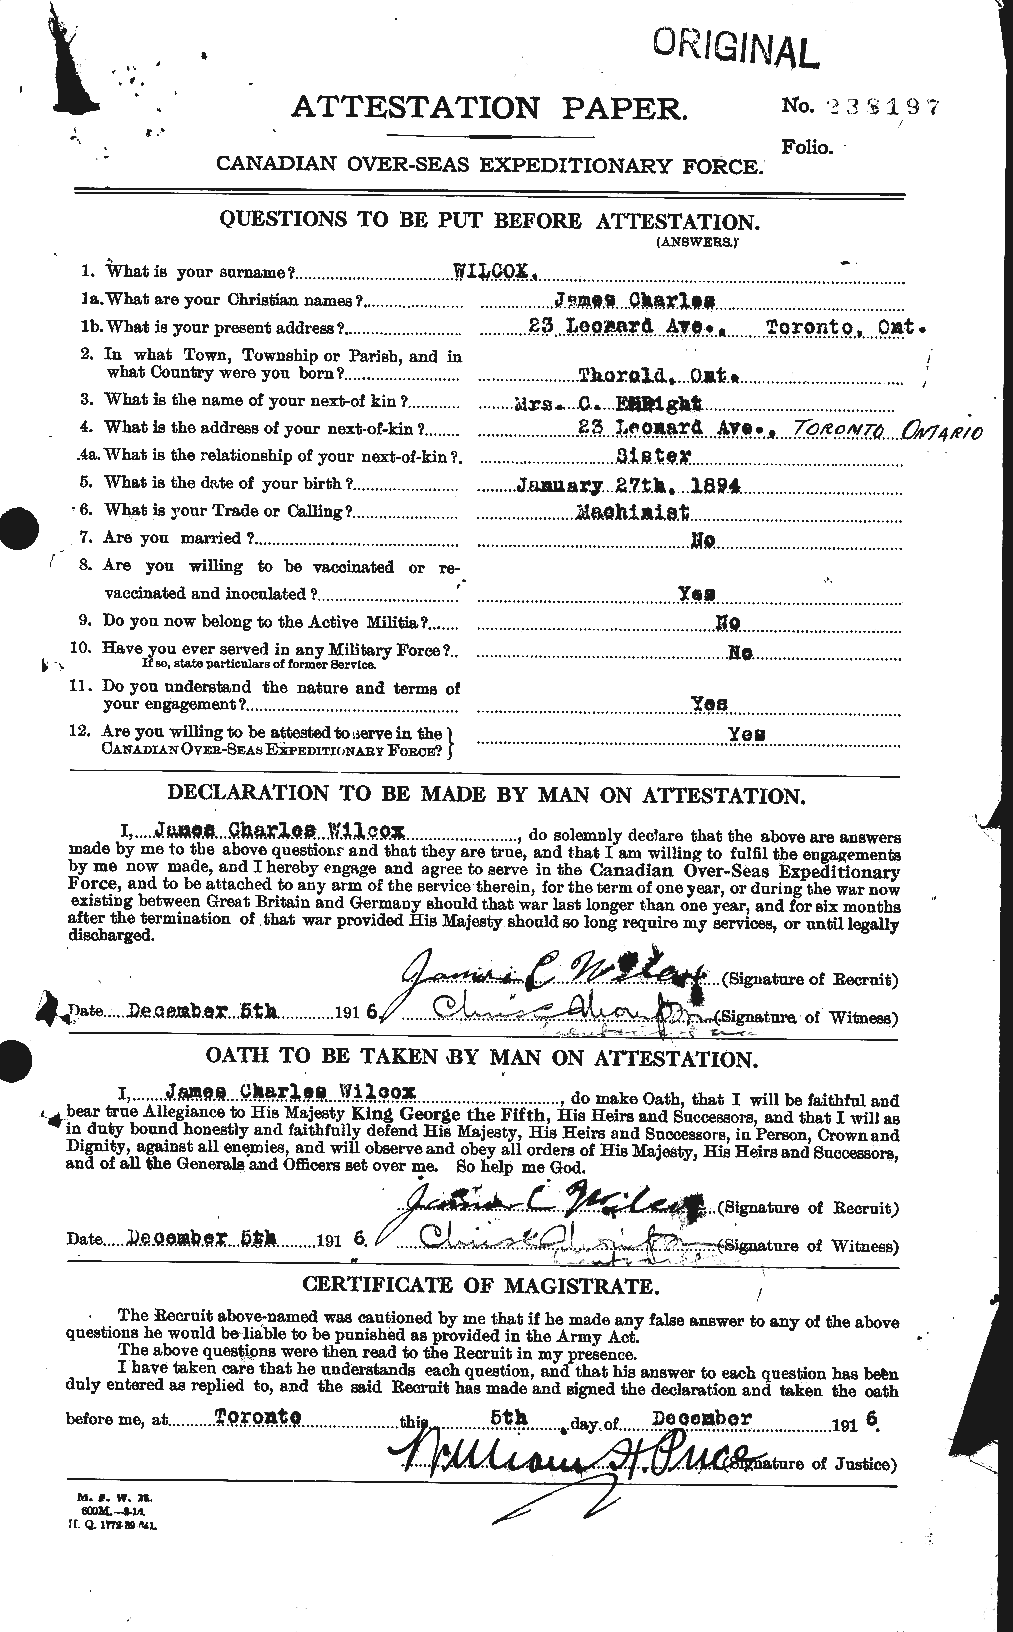 Personnel Records of the First World War - CEF 672028a